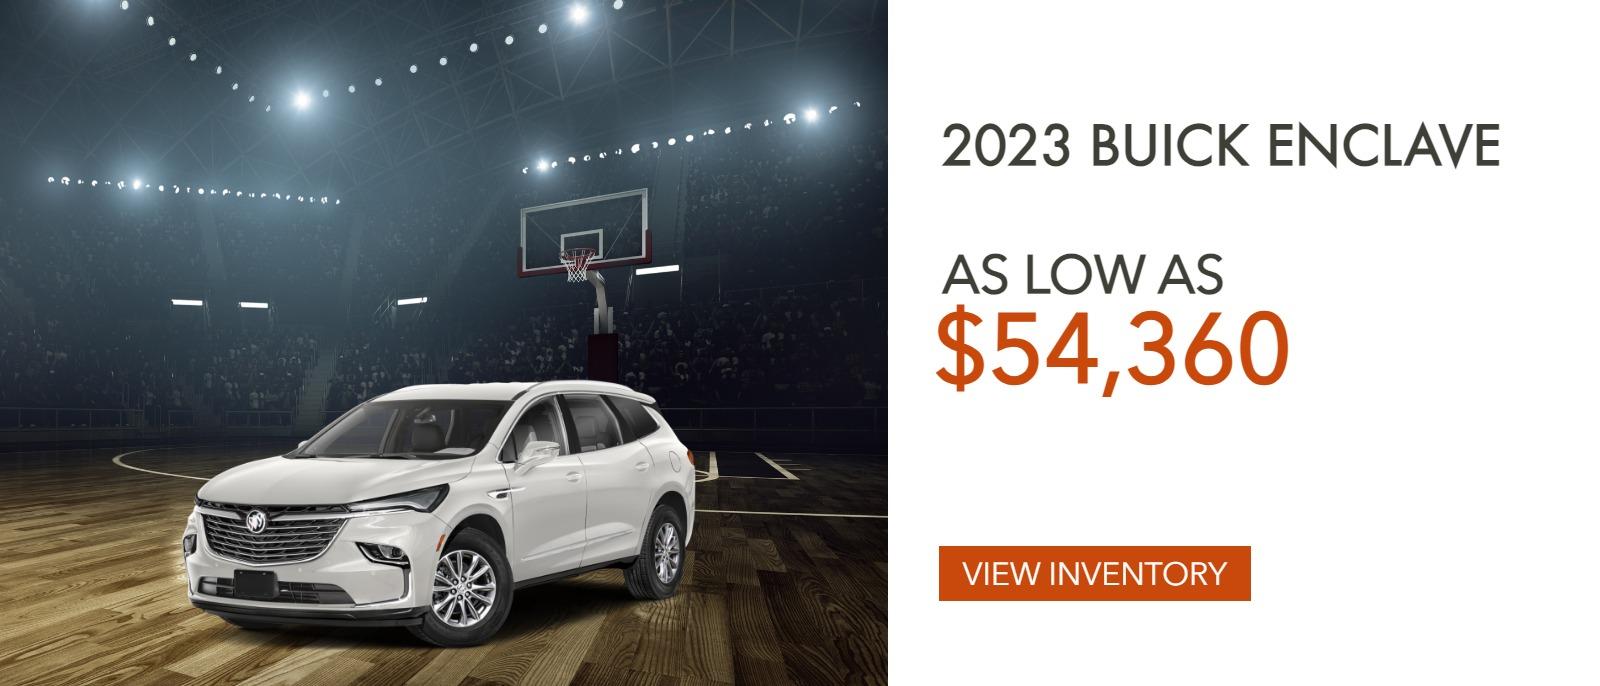 2023 Buick Enclave as low as $54,360